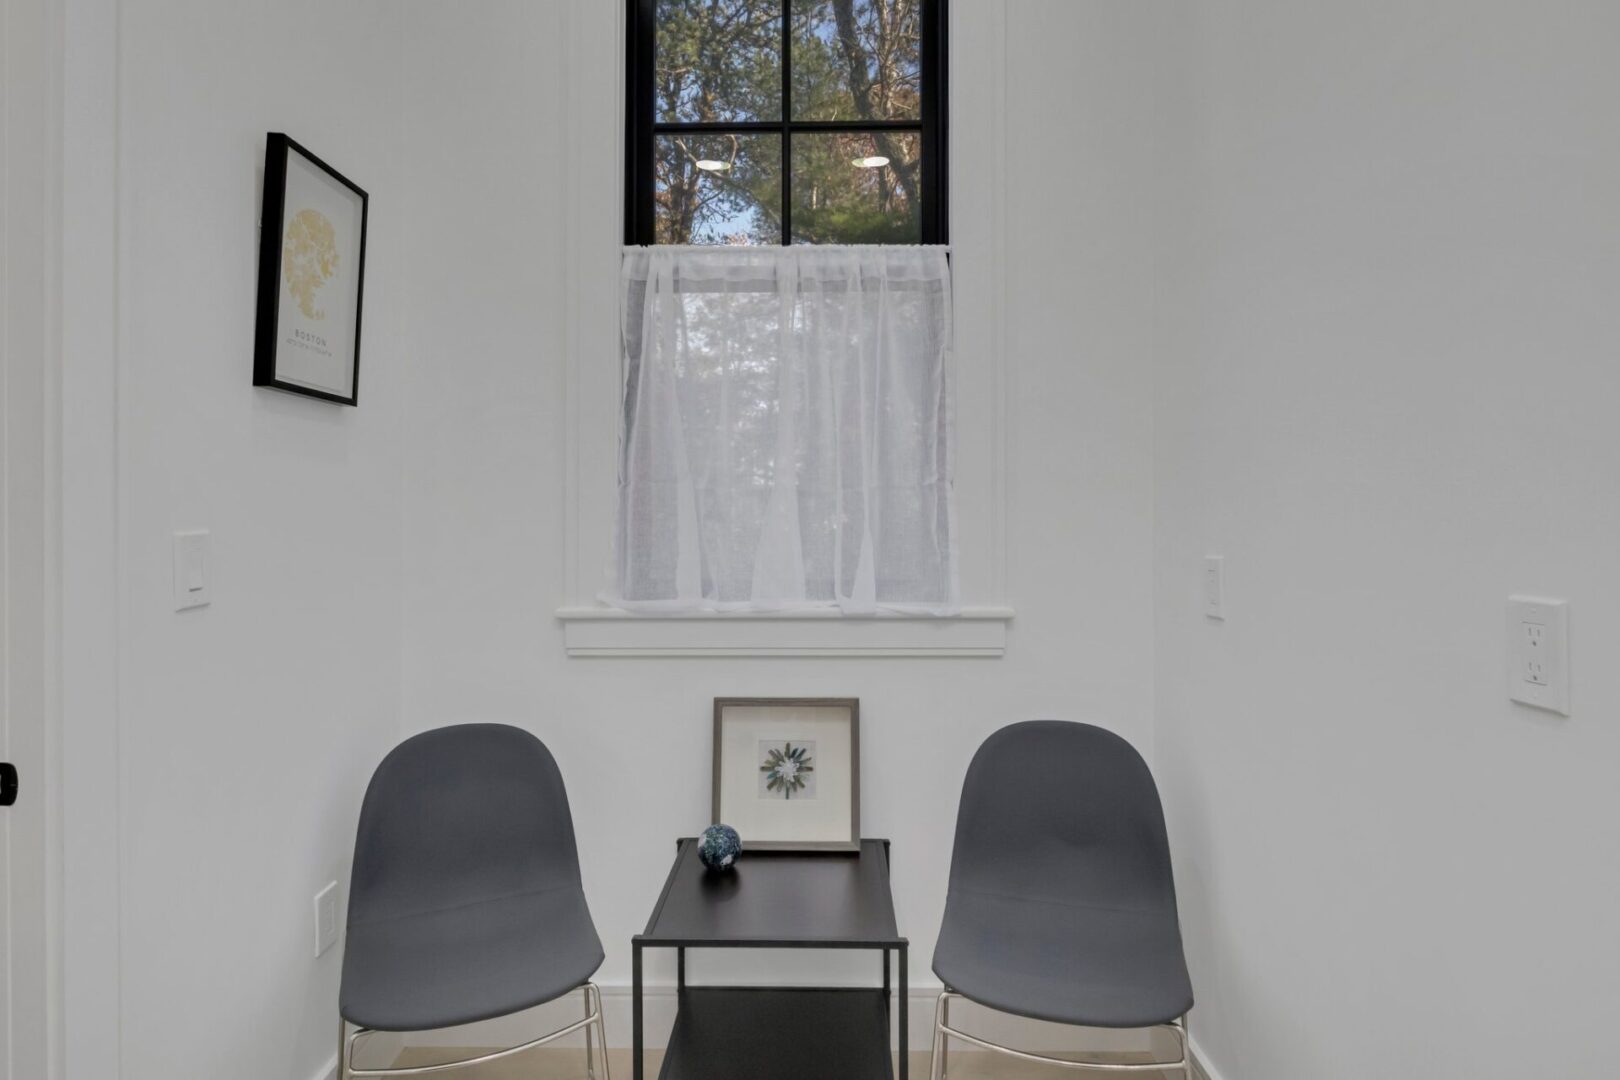 Two chairs and a table in front of a window.